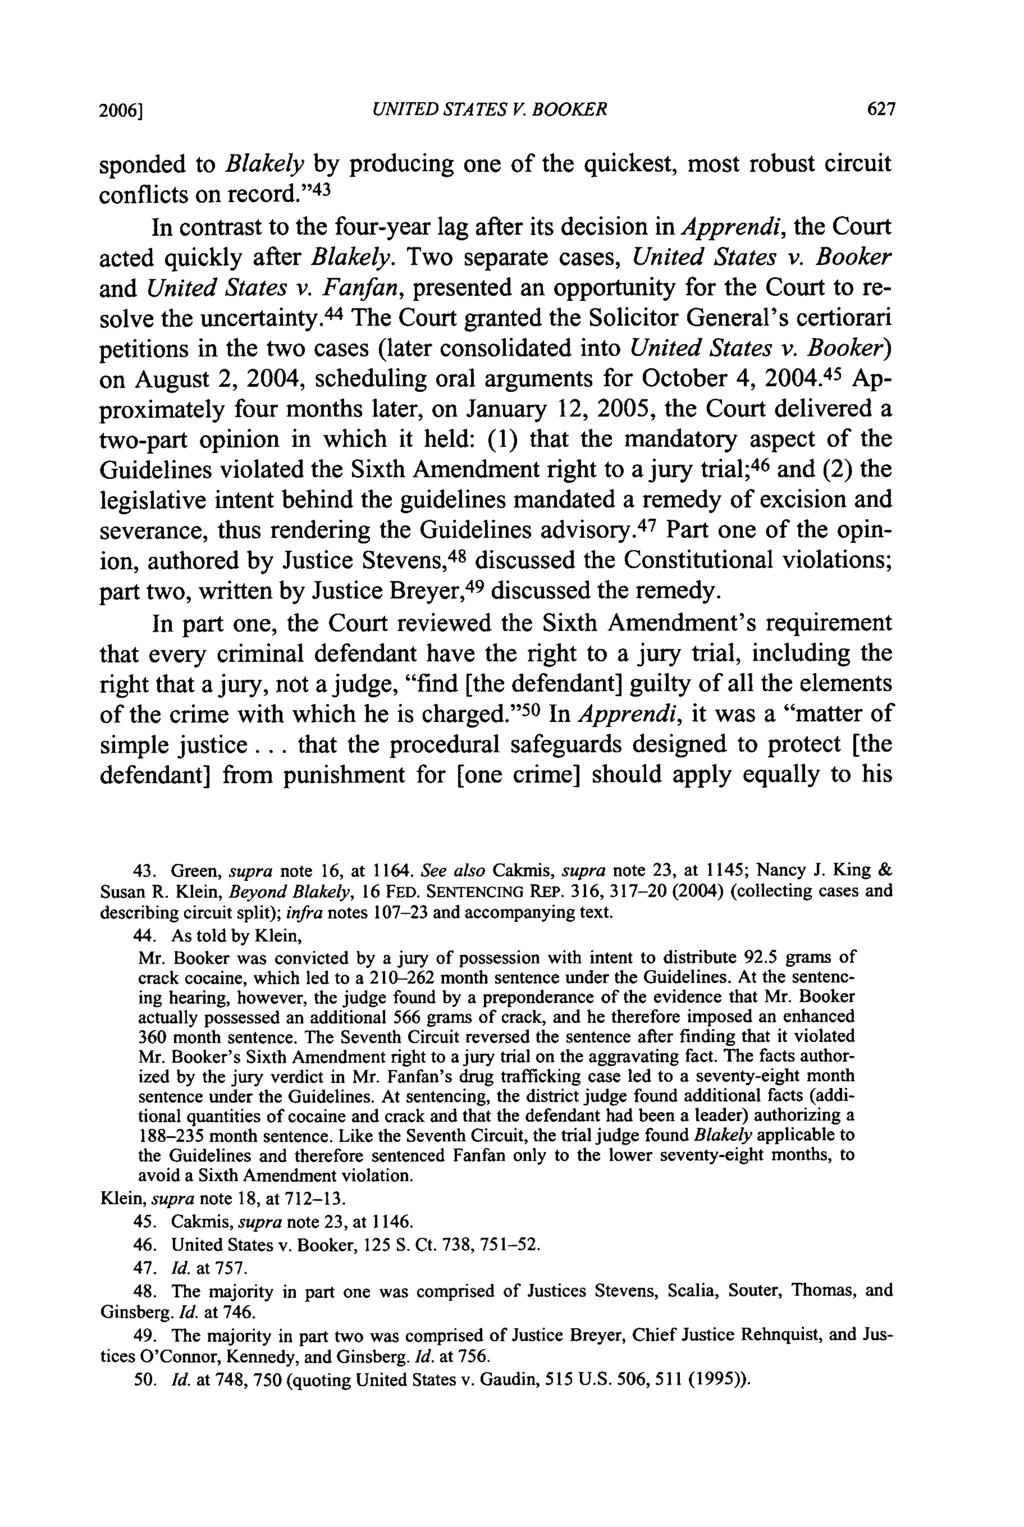 2006] UNITED STATES V. BOOKER sponded to Blakely by producing one of the quickest, most robust circuit conflicts on record.